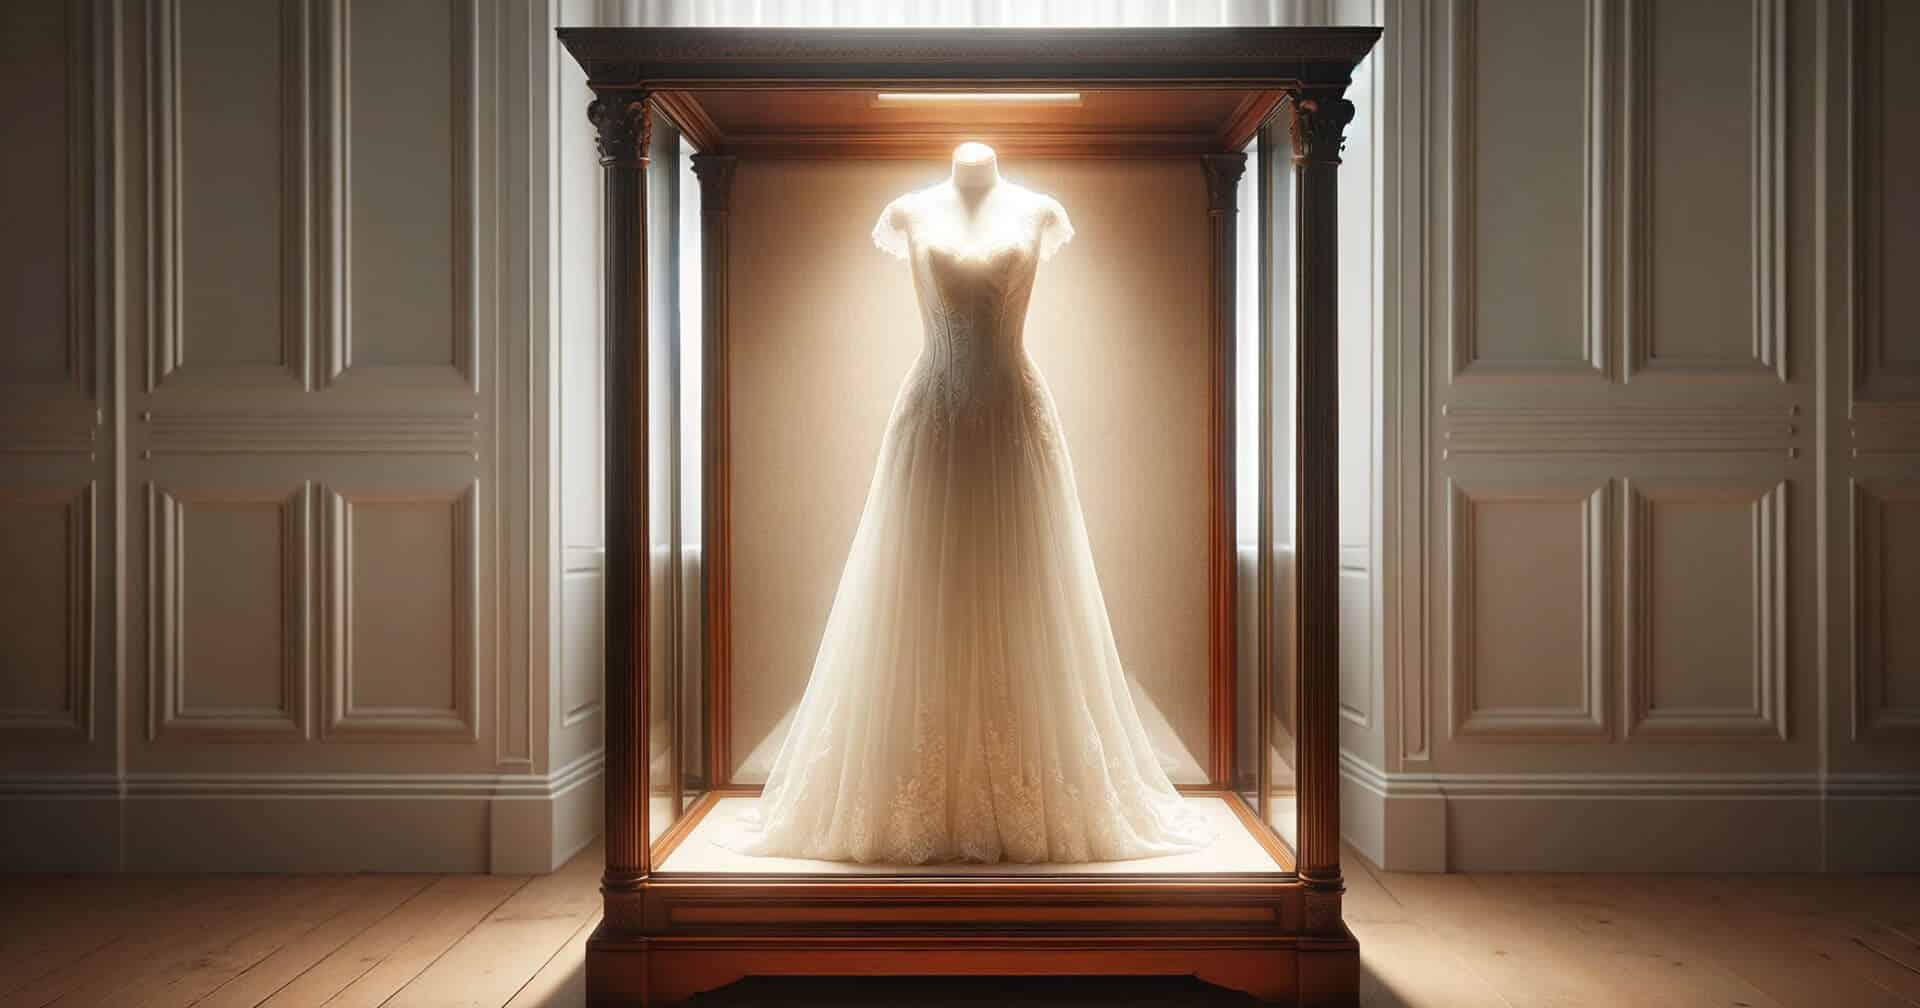 A wedding dress, impeccably preserved, is displayed in a glass case.